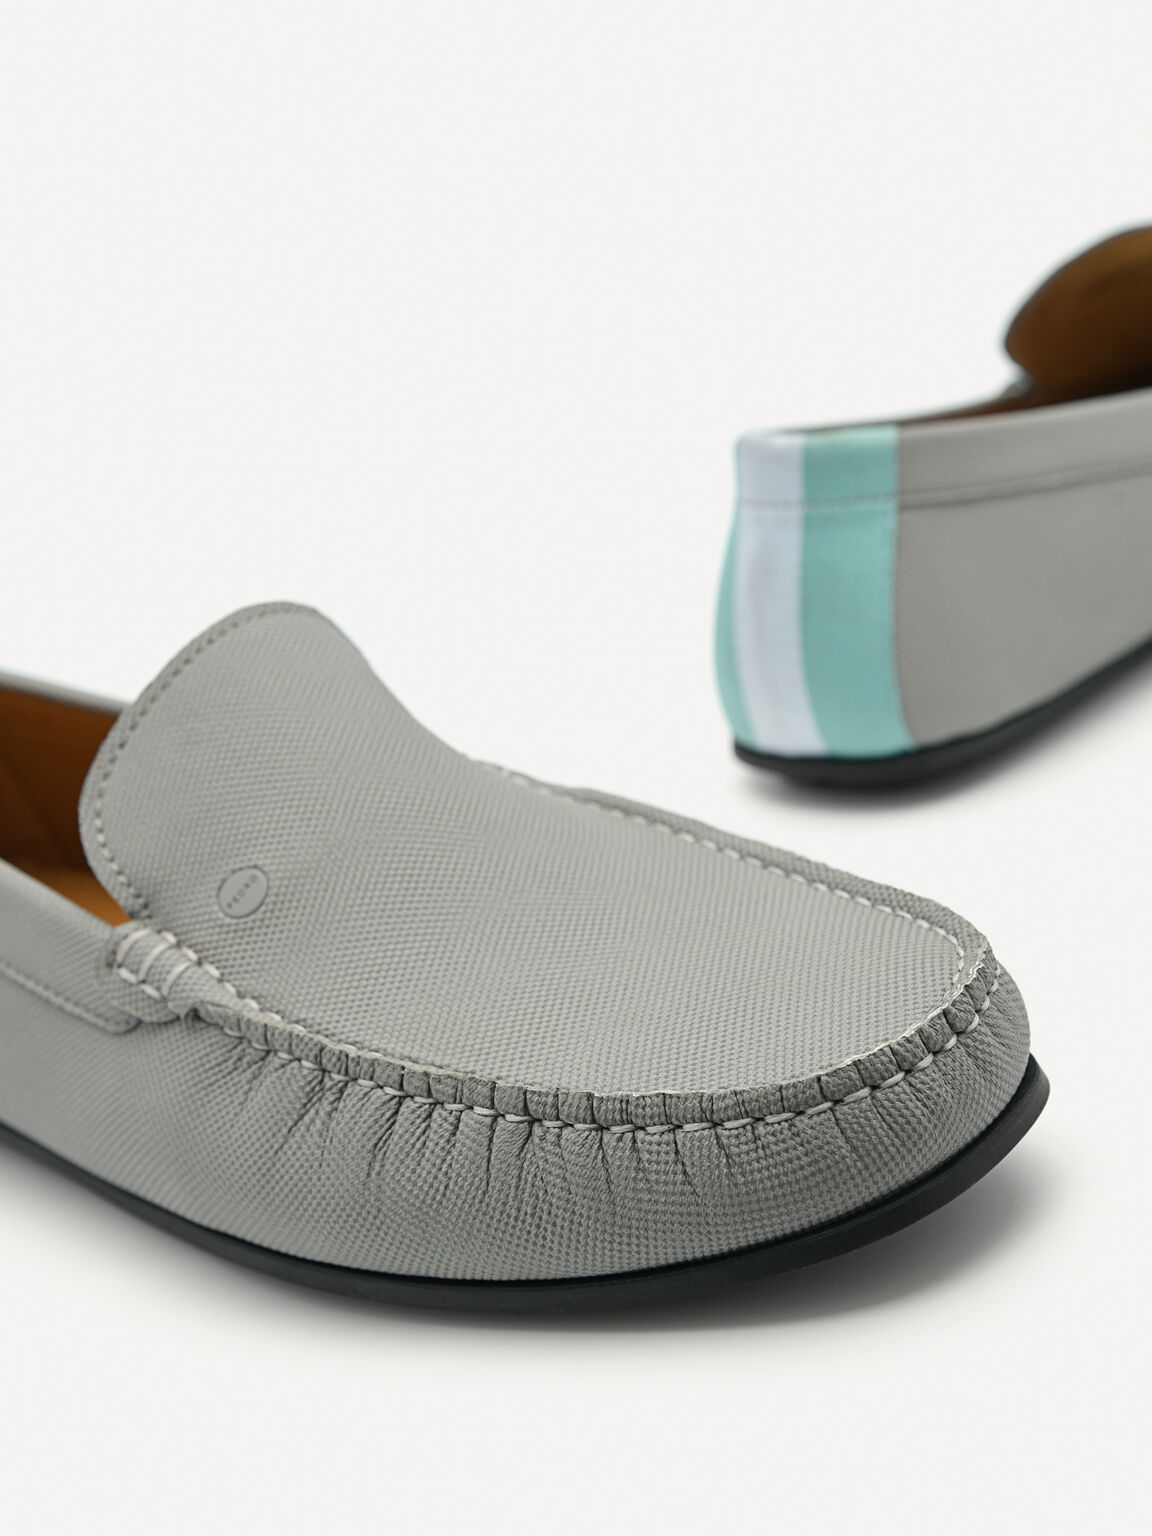 Leather & Fabric Slip-On Driving Shoes, Grey, hi-res